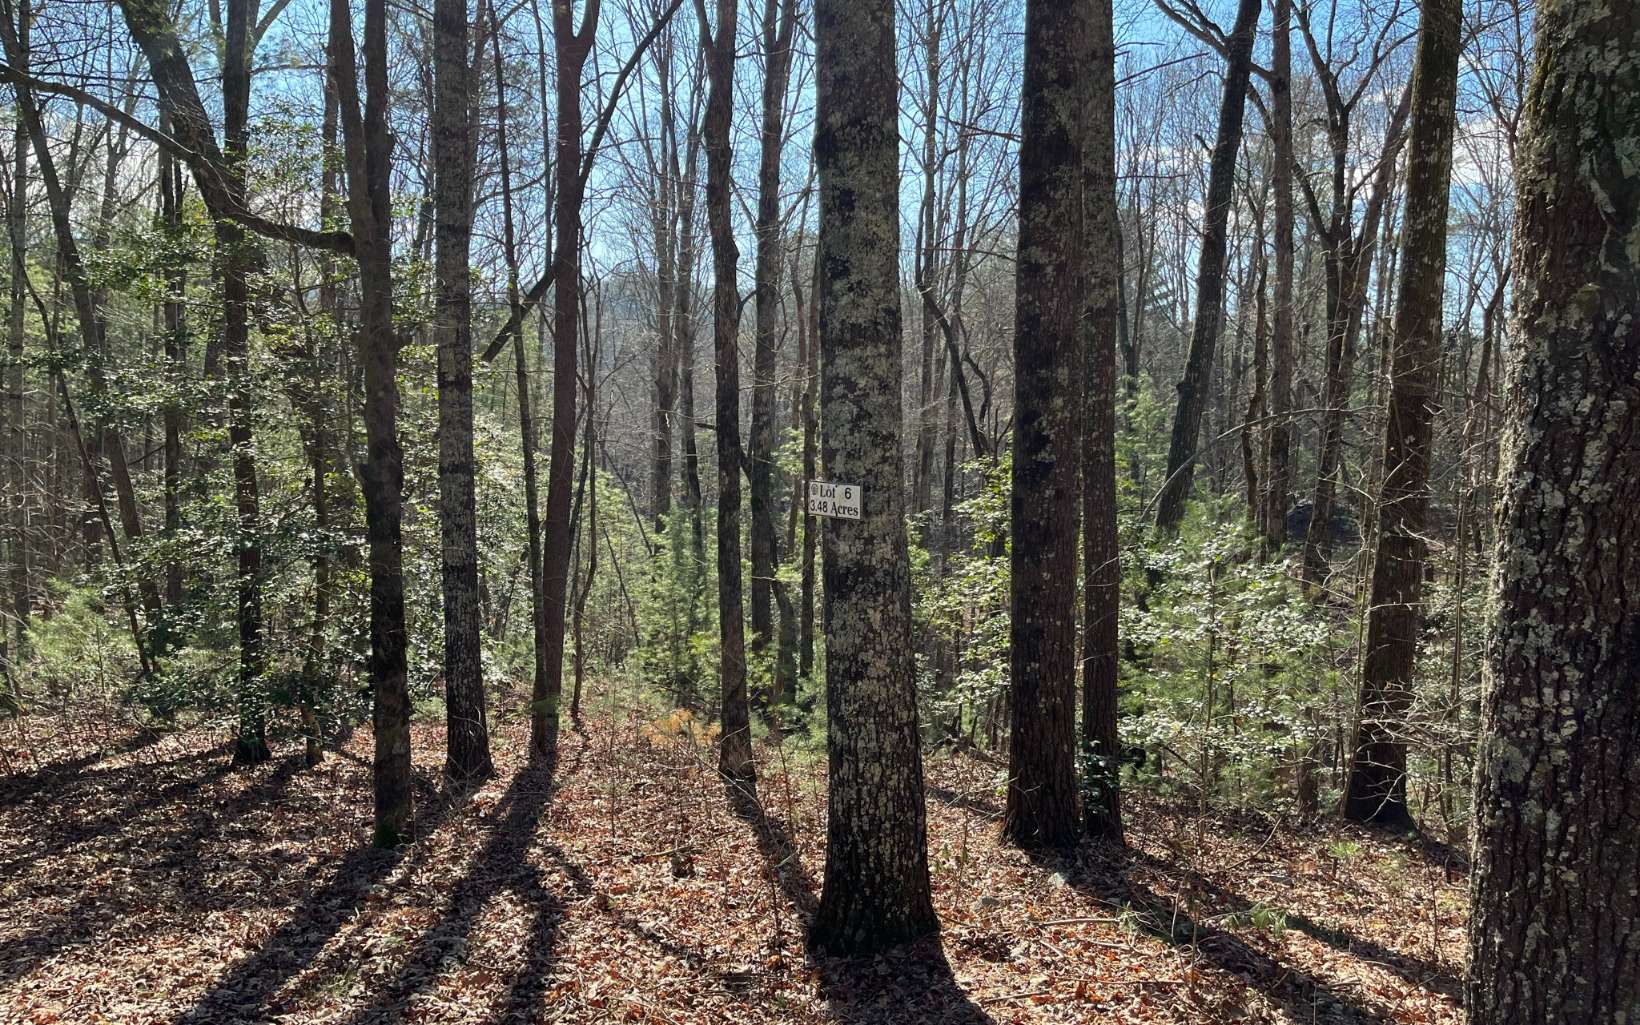 You will love driving home to your future mountain retreat and this 3.5 acre lot in the quaint, well-established community of Pickett Mill. A small spring fed stream borders the back of the property where deer and turkey traverse through an abundance of native trees & flowering vegetation. Common area access to gorgeous E. Mountain Creek, and the sound of the waterfalls can be heard from this property. Cohutta WMA, FS roads, Ft. Mtn State Park, Lake Conasauga all nearby, yet only 10 minutes to downtown Ellijay’s unique local shops and dining flair. Soil work has been completed w/underground power accessible at the property line.